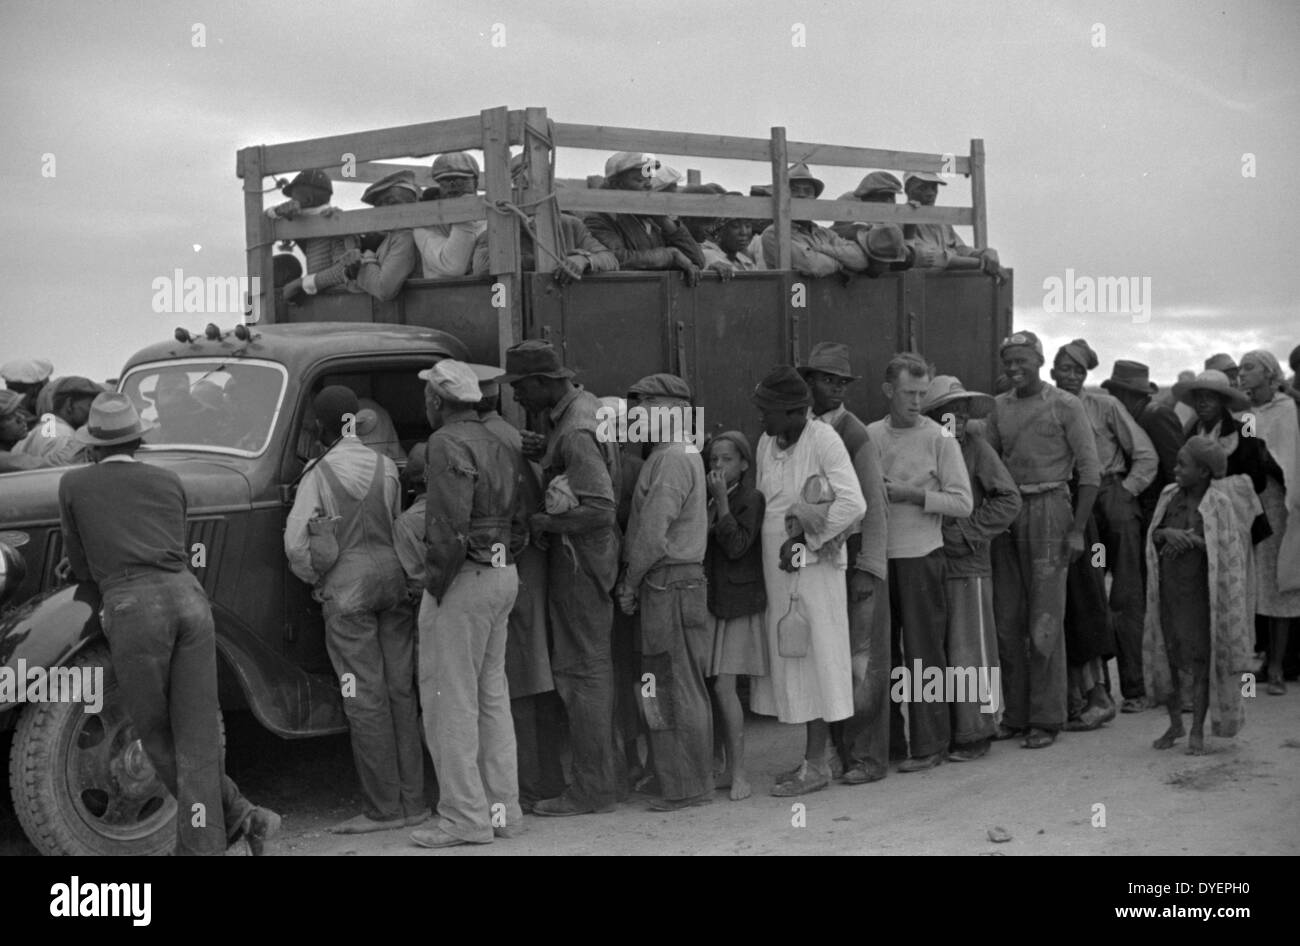 Vegetable workers, migrants, waiting after work to be paid. Near Homestead, Florida 19390101 Stock Photo